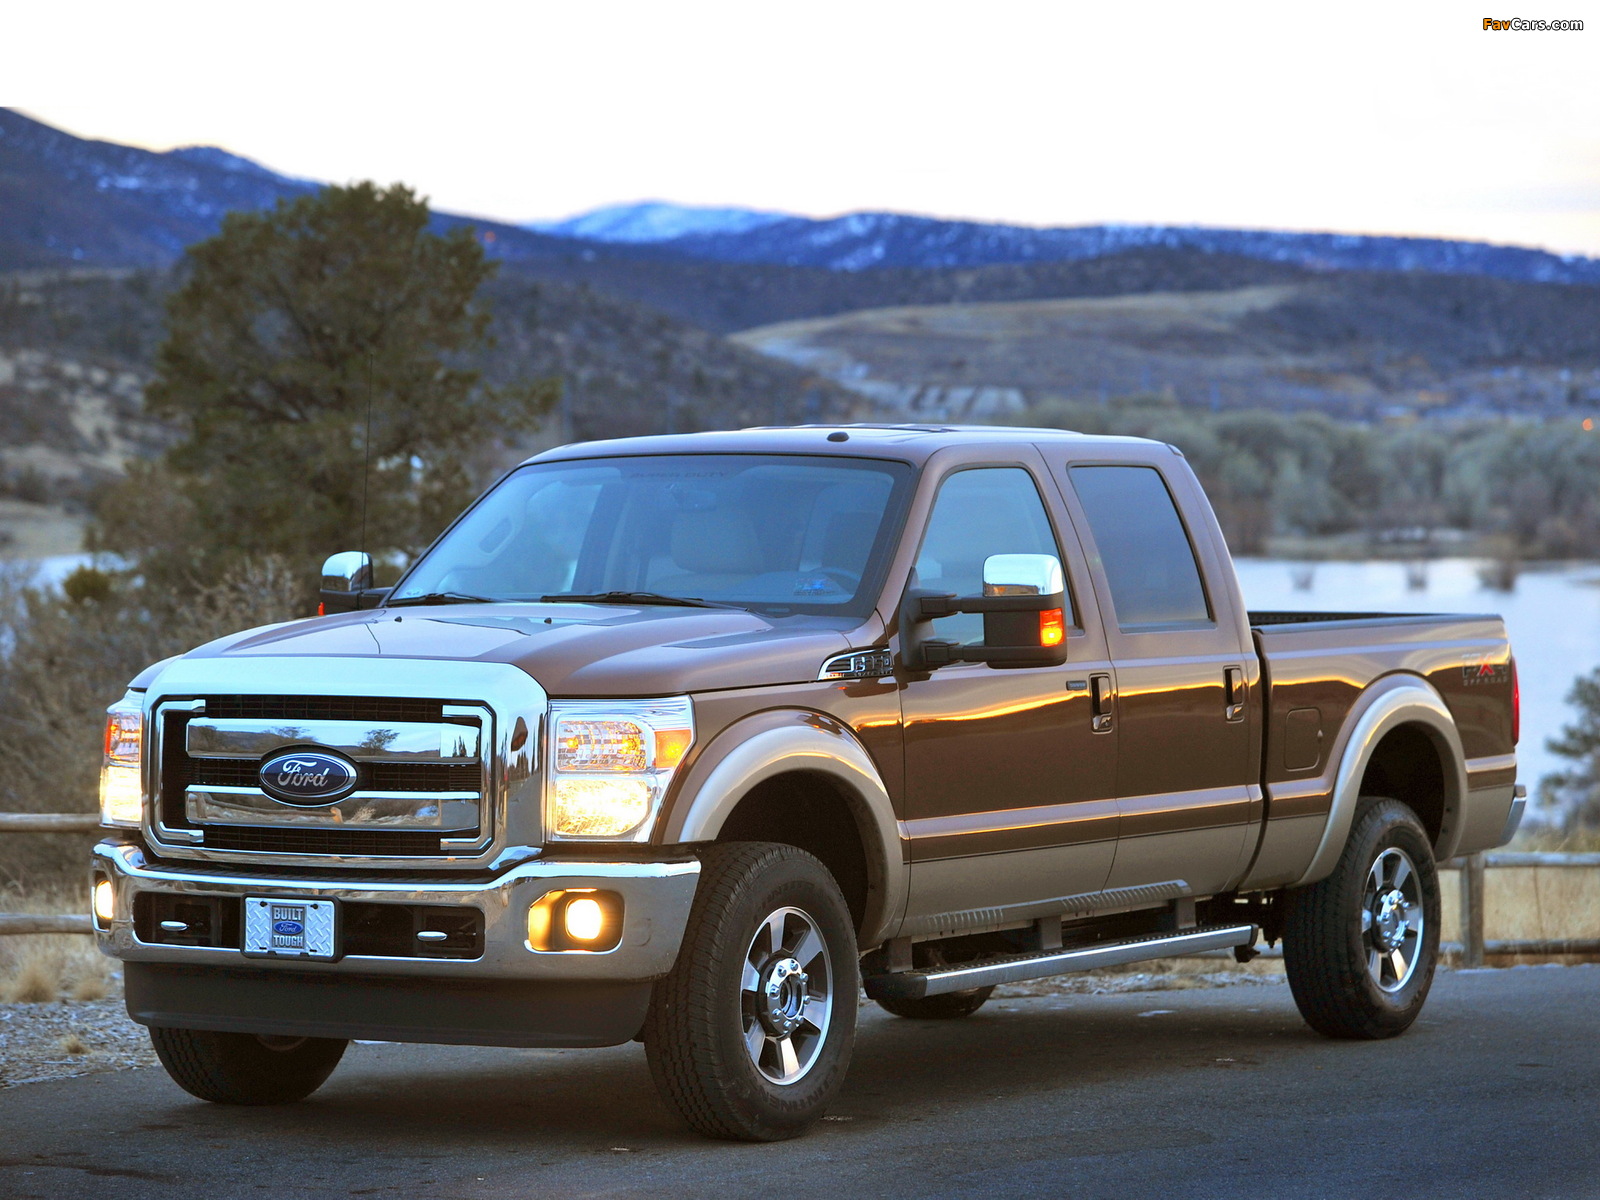 Ford F-350 Super Duty Crew Cab 2010 pictures (1600 x 1200)